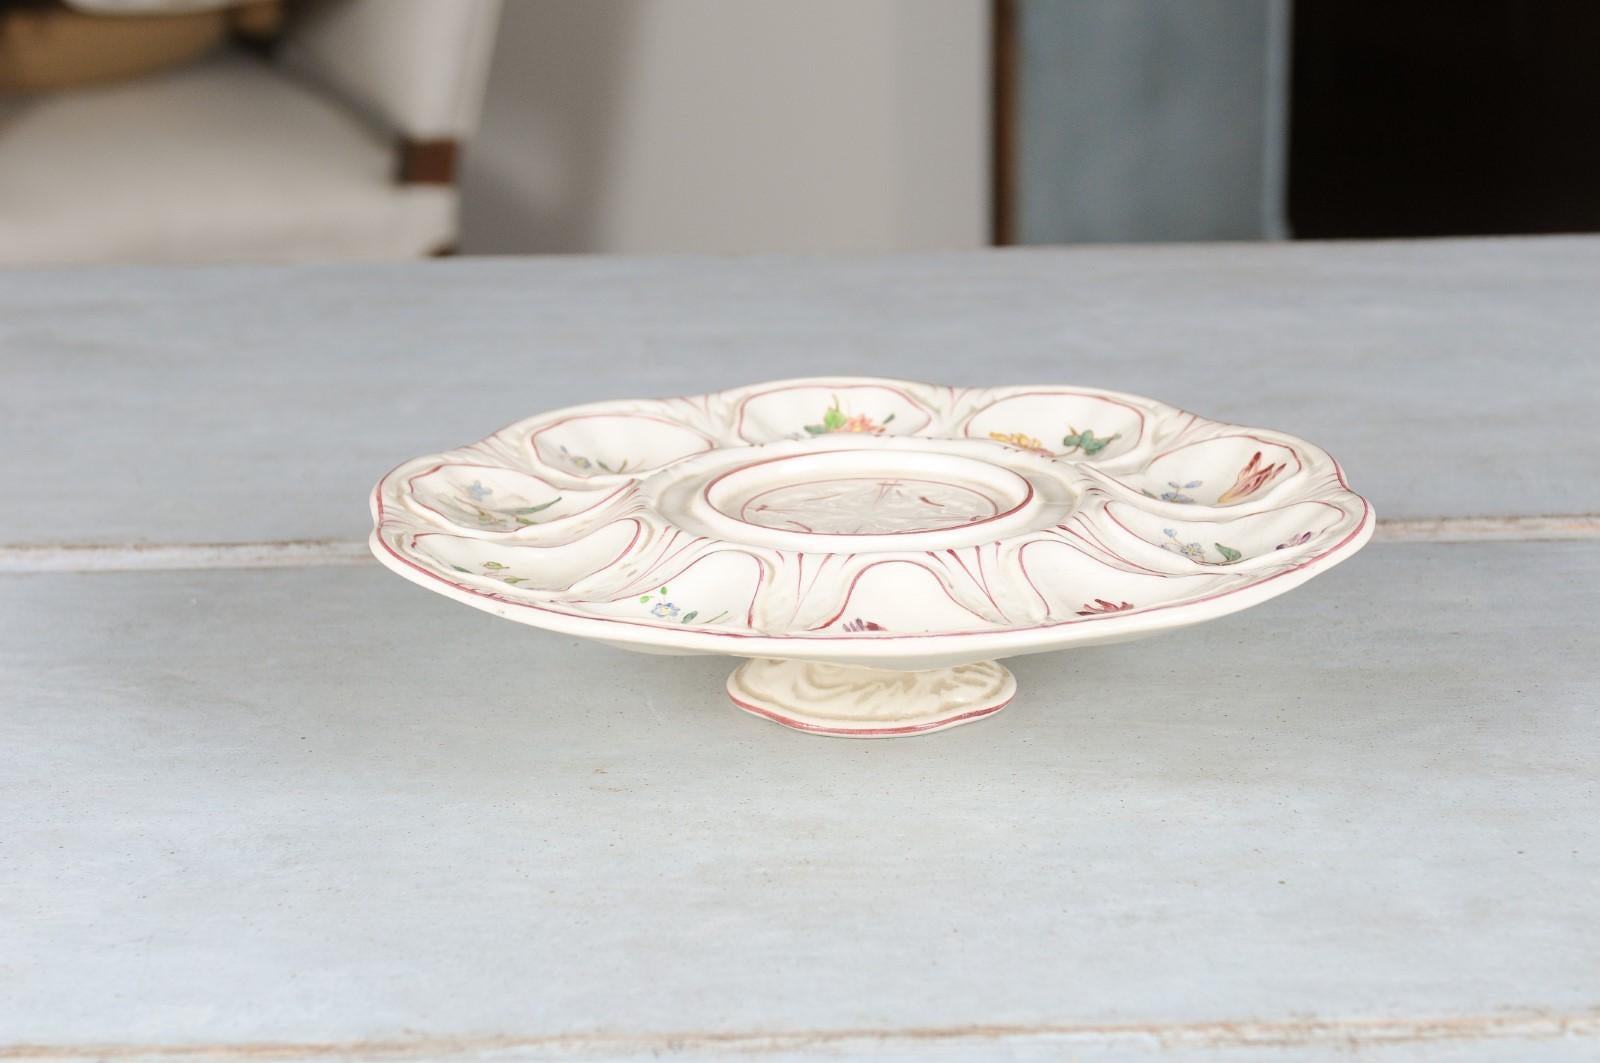 A French Longchamp majolica oyster platter from the late 19th century, with flowers and petite base. Created in France during the last quarter of the 19th century, this Majolica oyster platter is adorned with delicate flowers boasting pink, purple